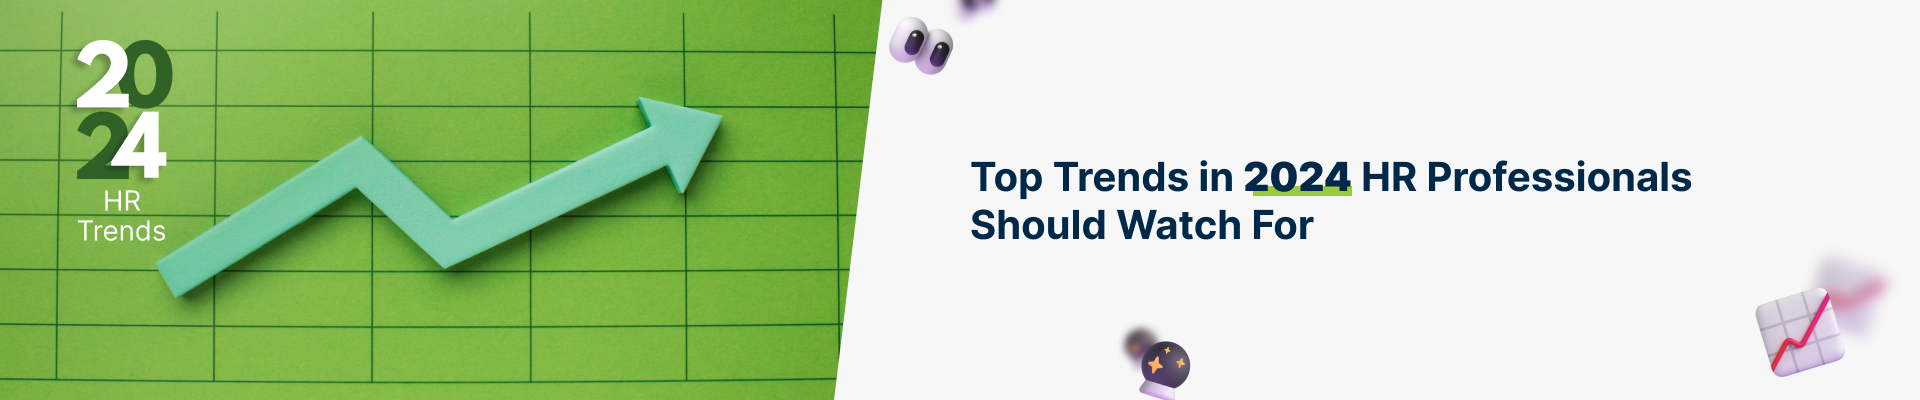 Top Trends in 2024 HR Professionals Should Watch For